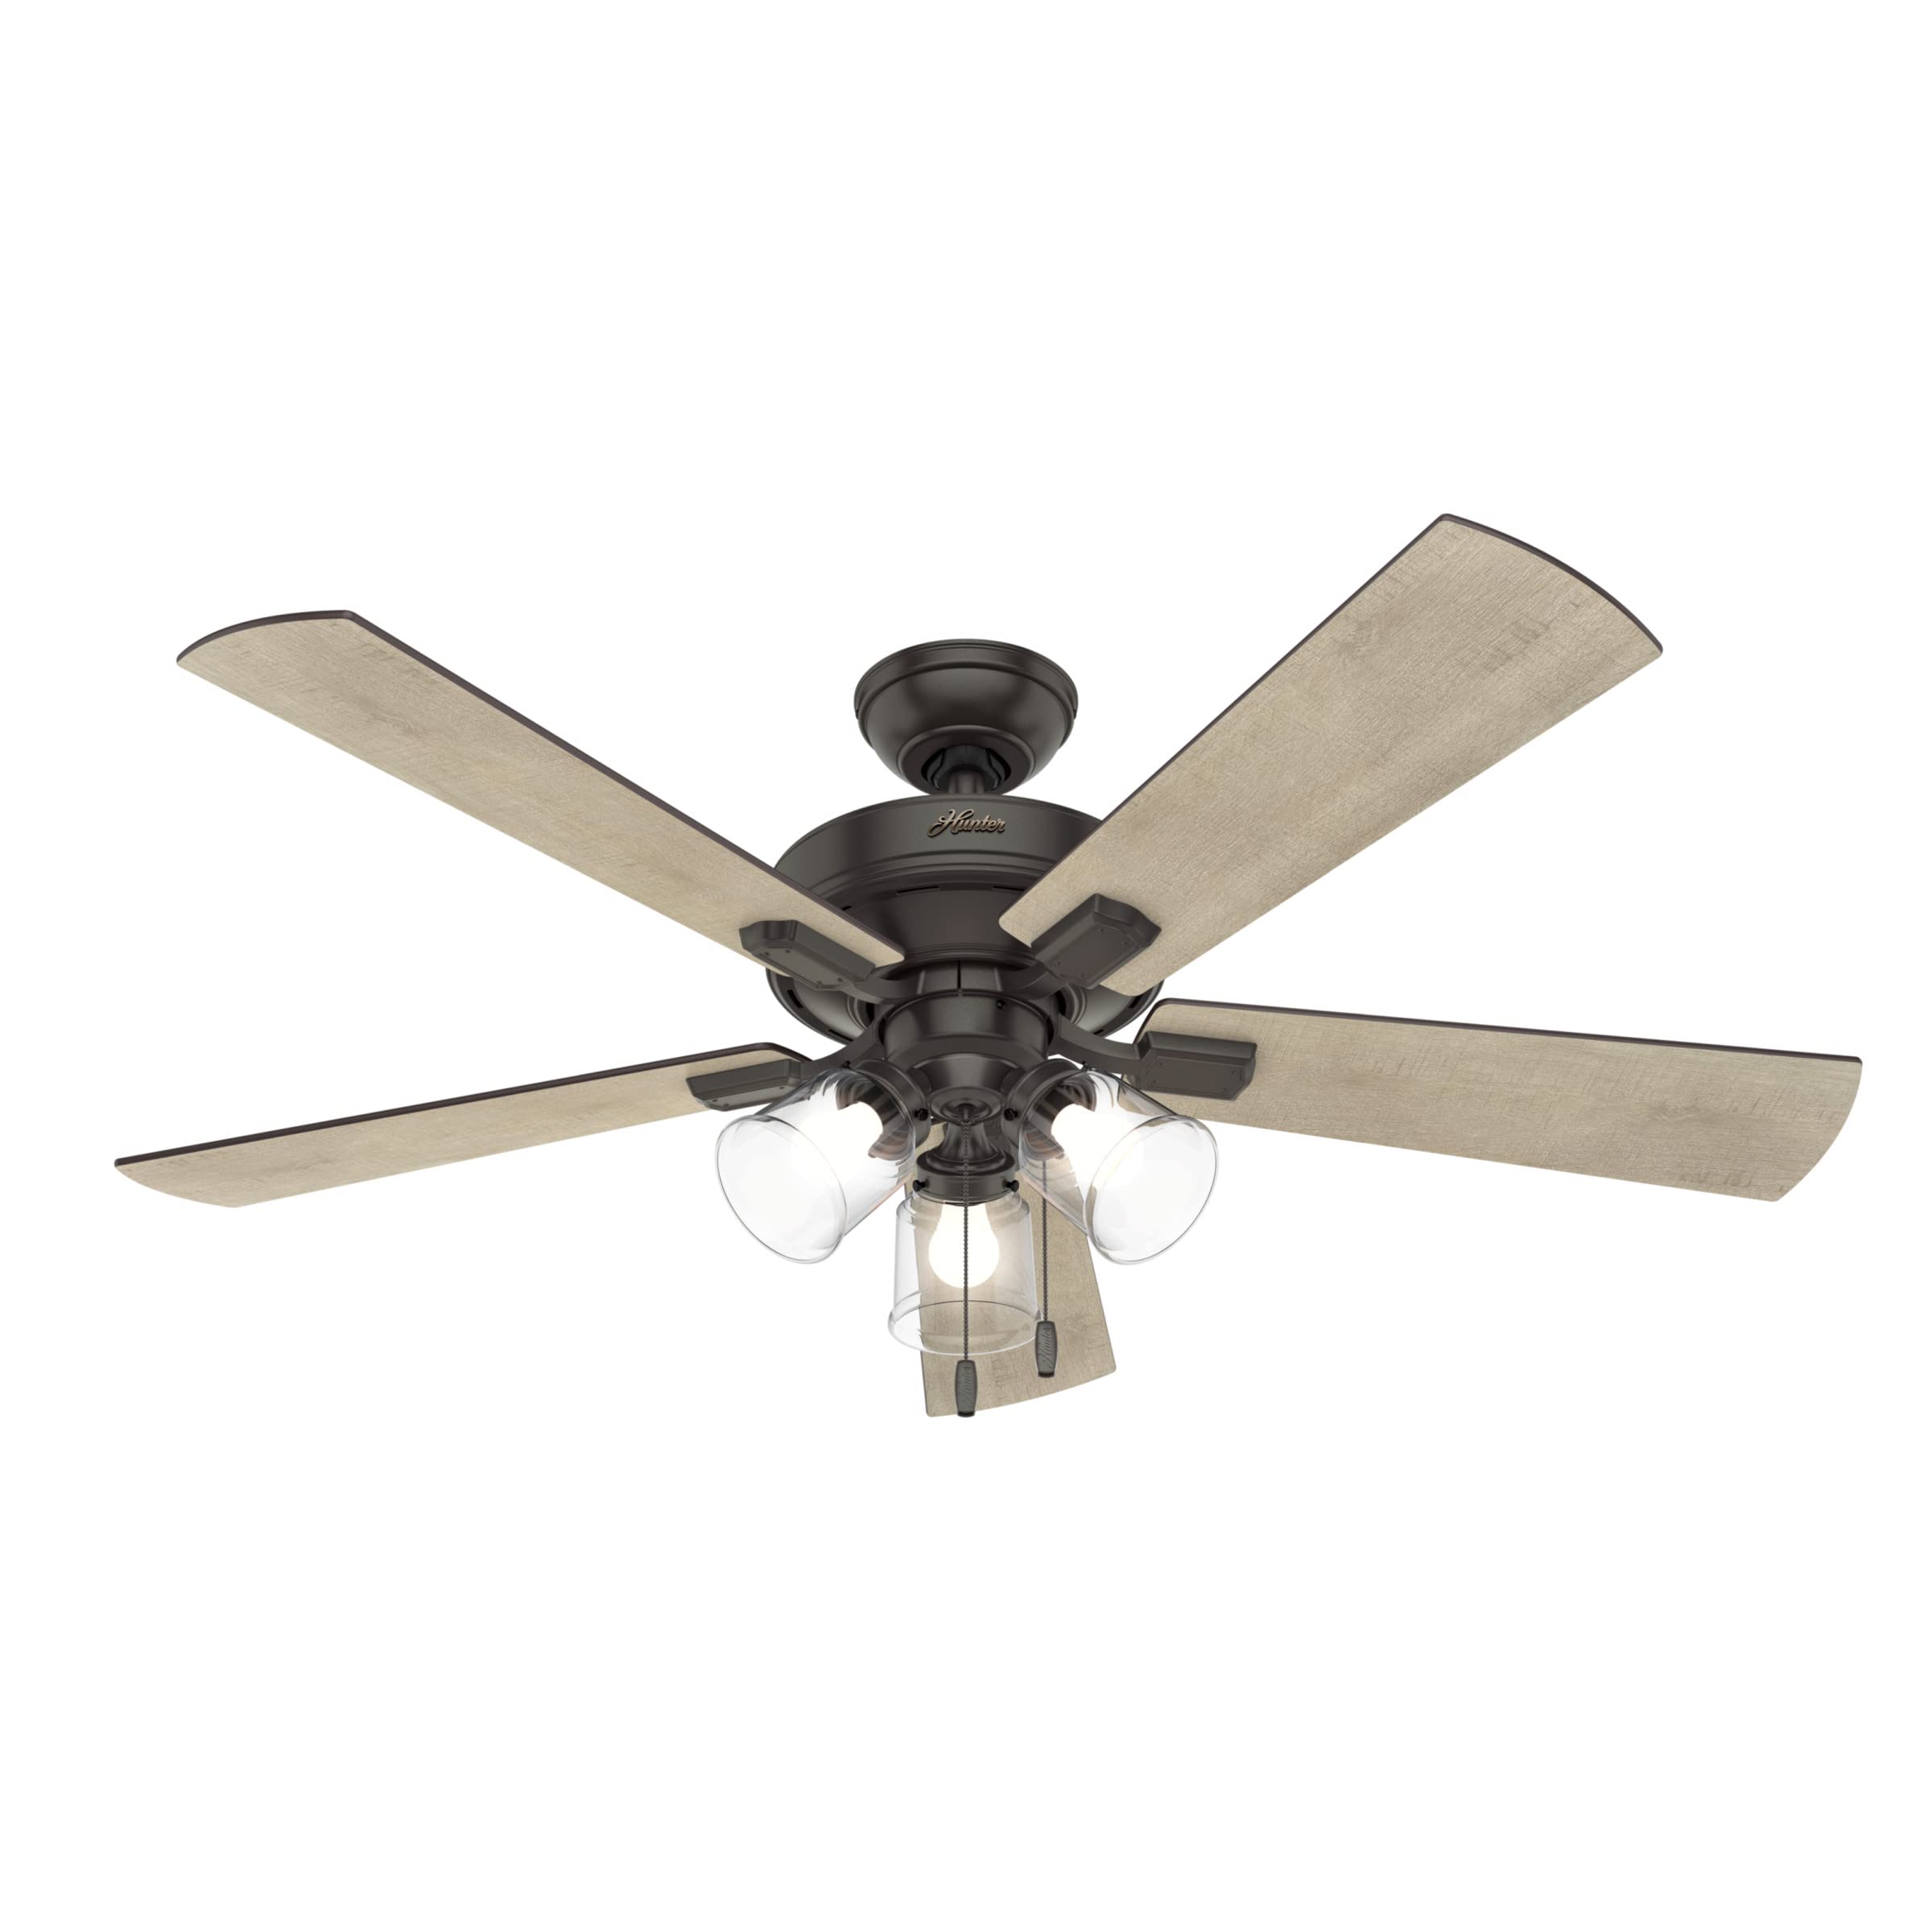 Hunter Fan Company, 54205, 52 inch Crestfield Noble Bronze Ceiling Fan with LED Light Kit and Pull Chain